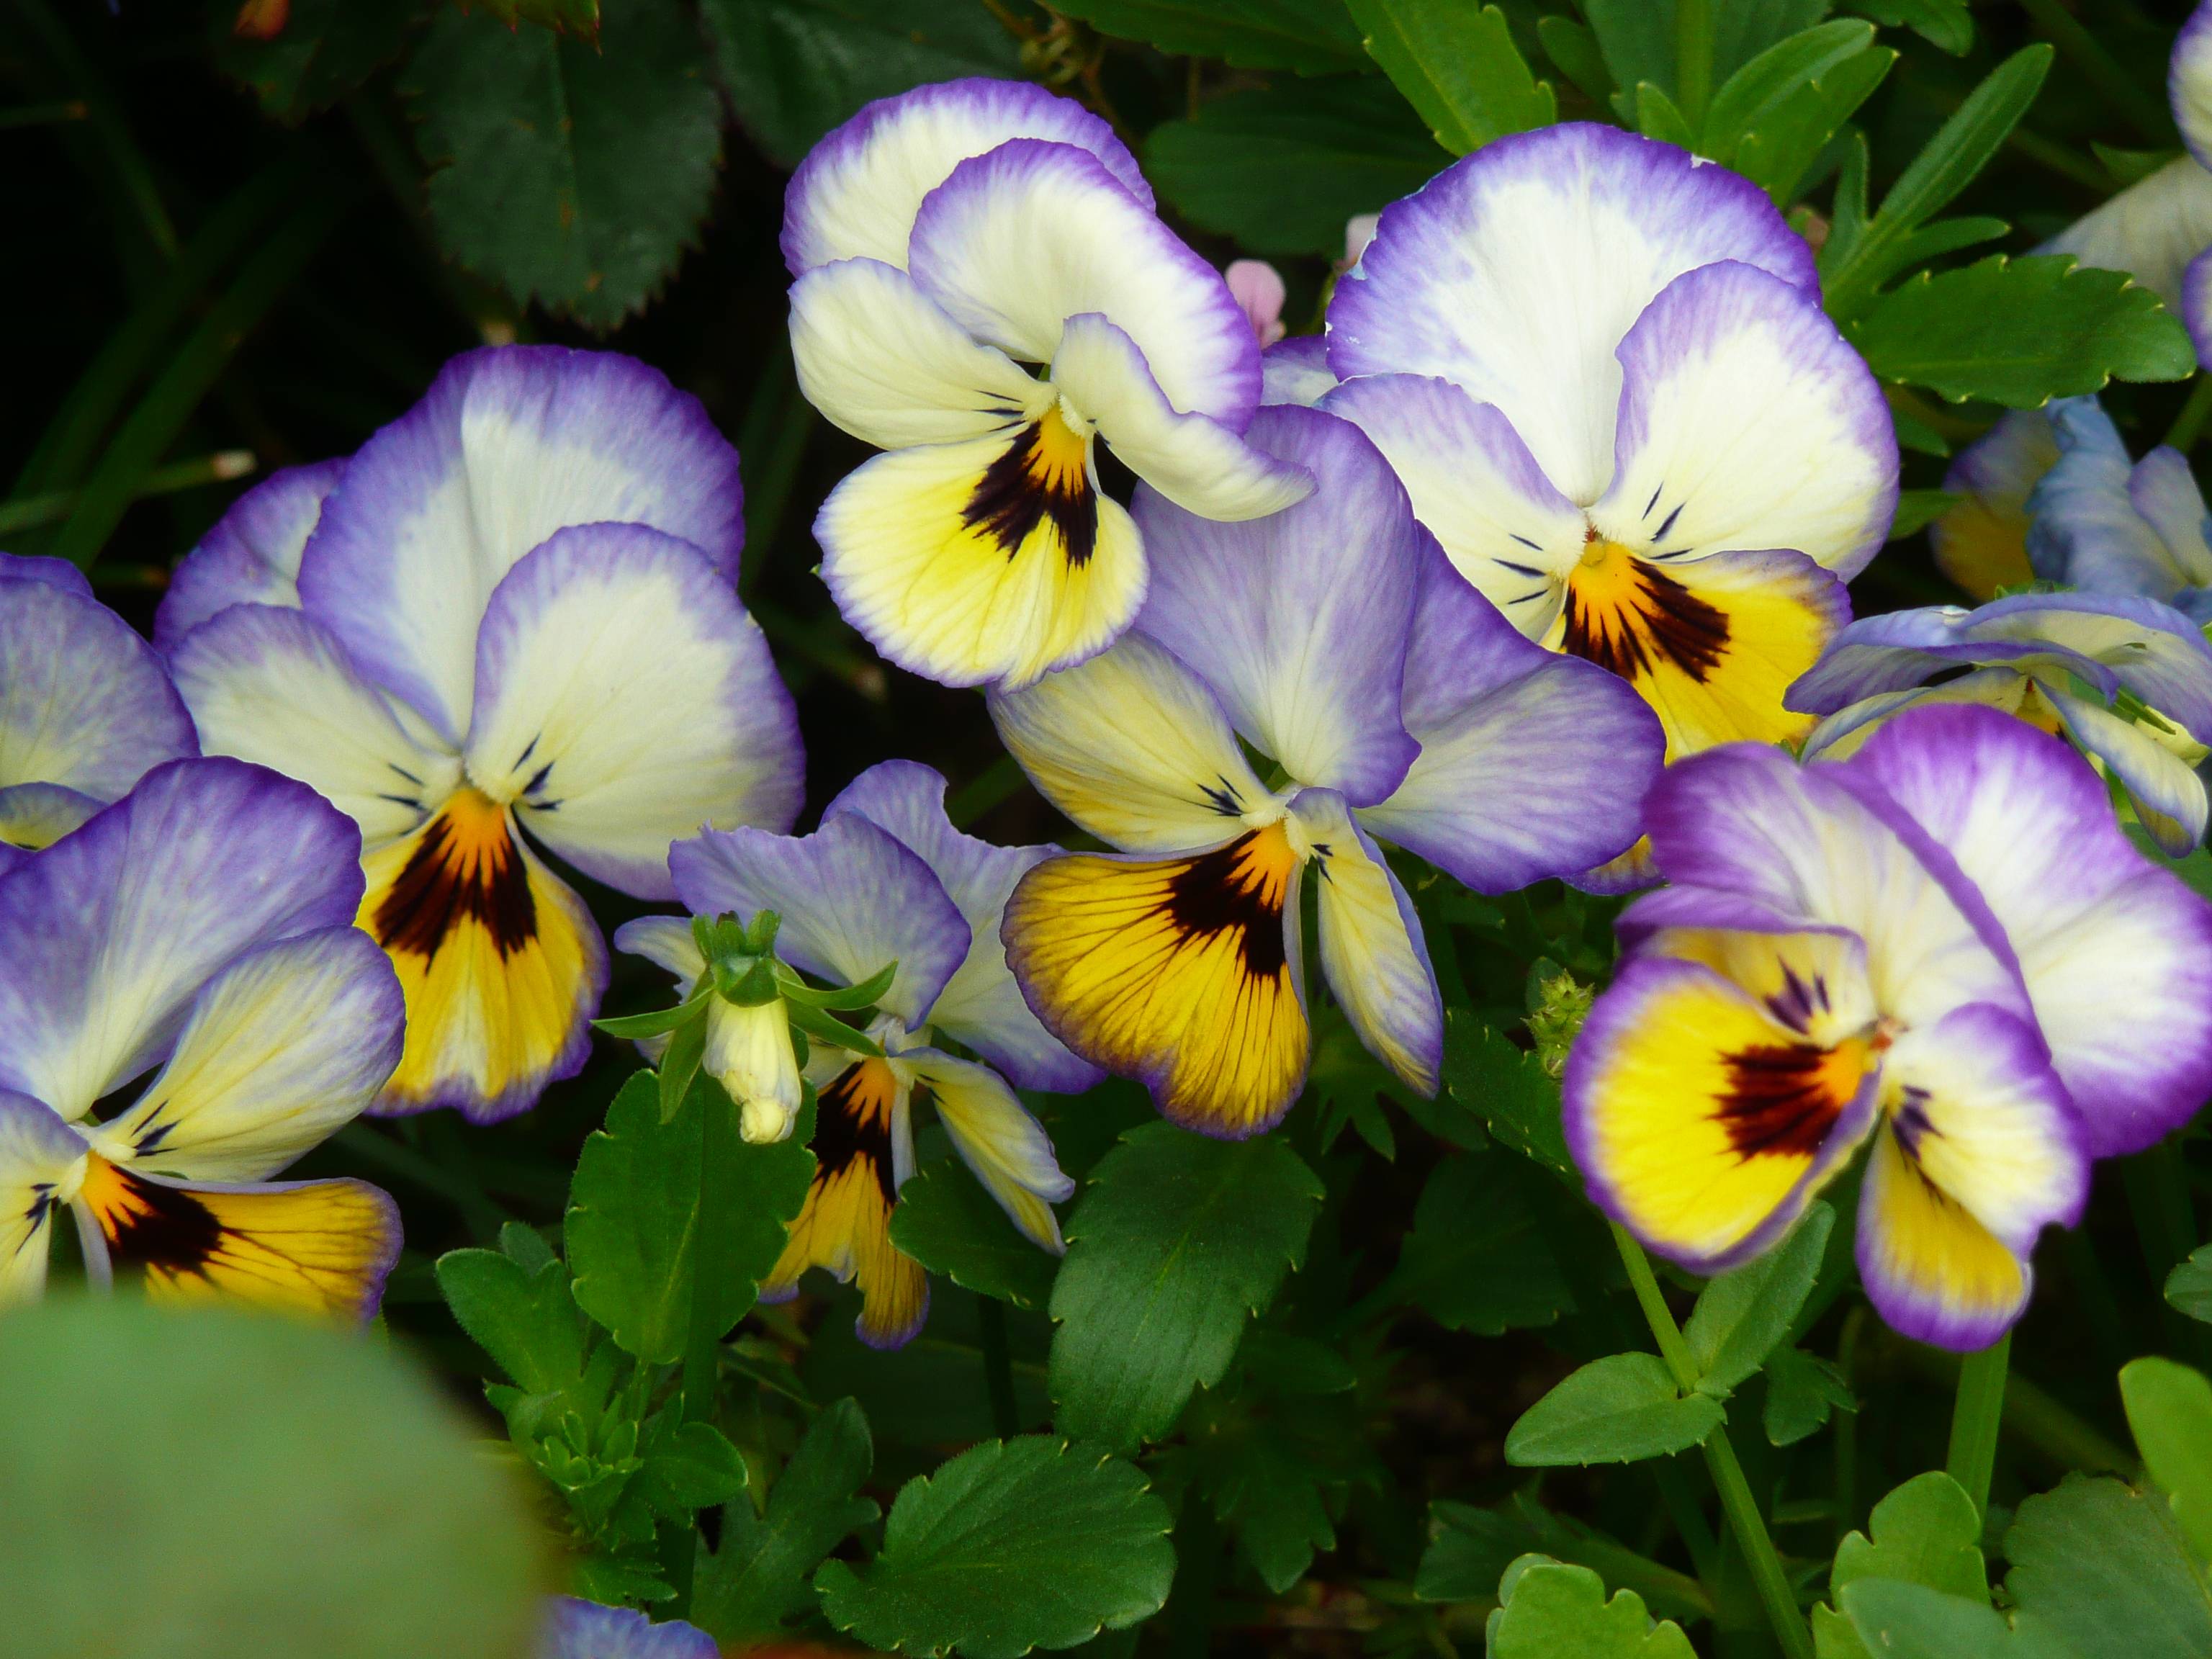 Viola (violet, pansy) wallpaper and image, picture